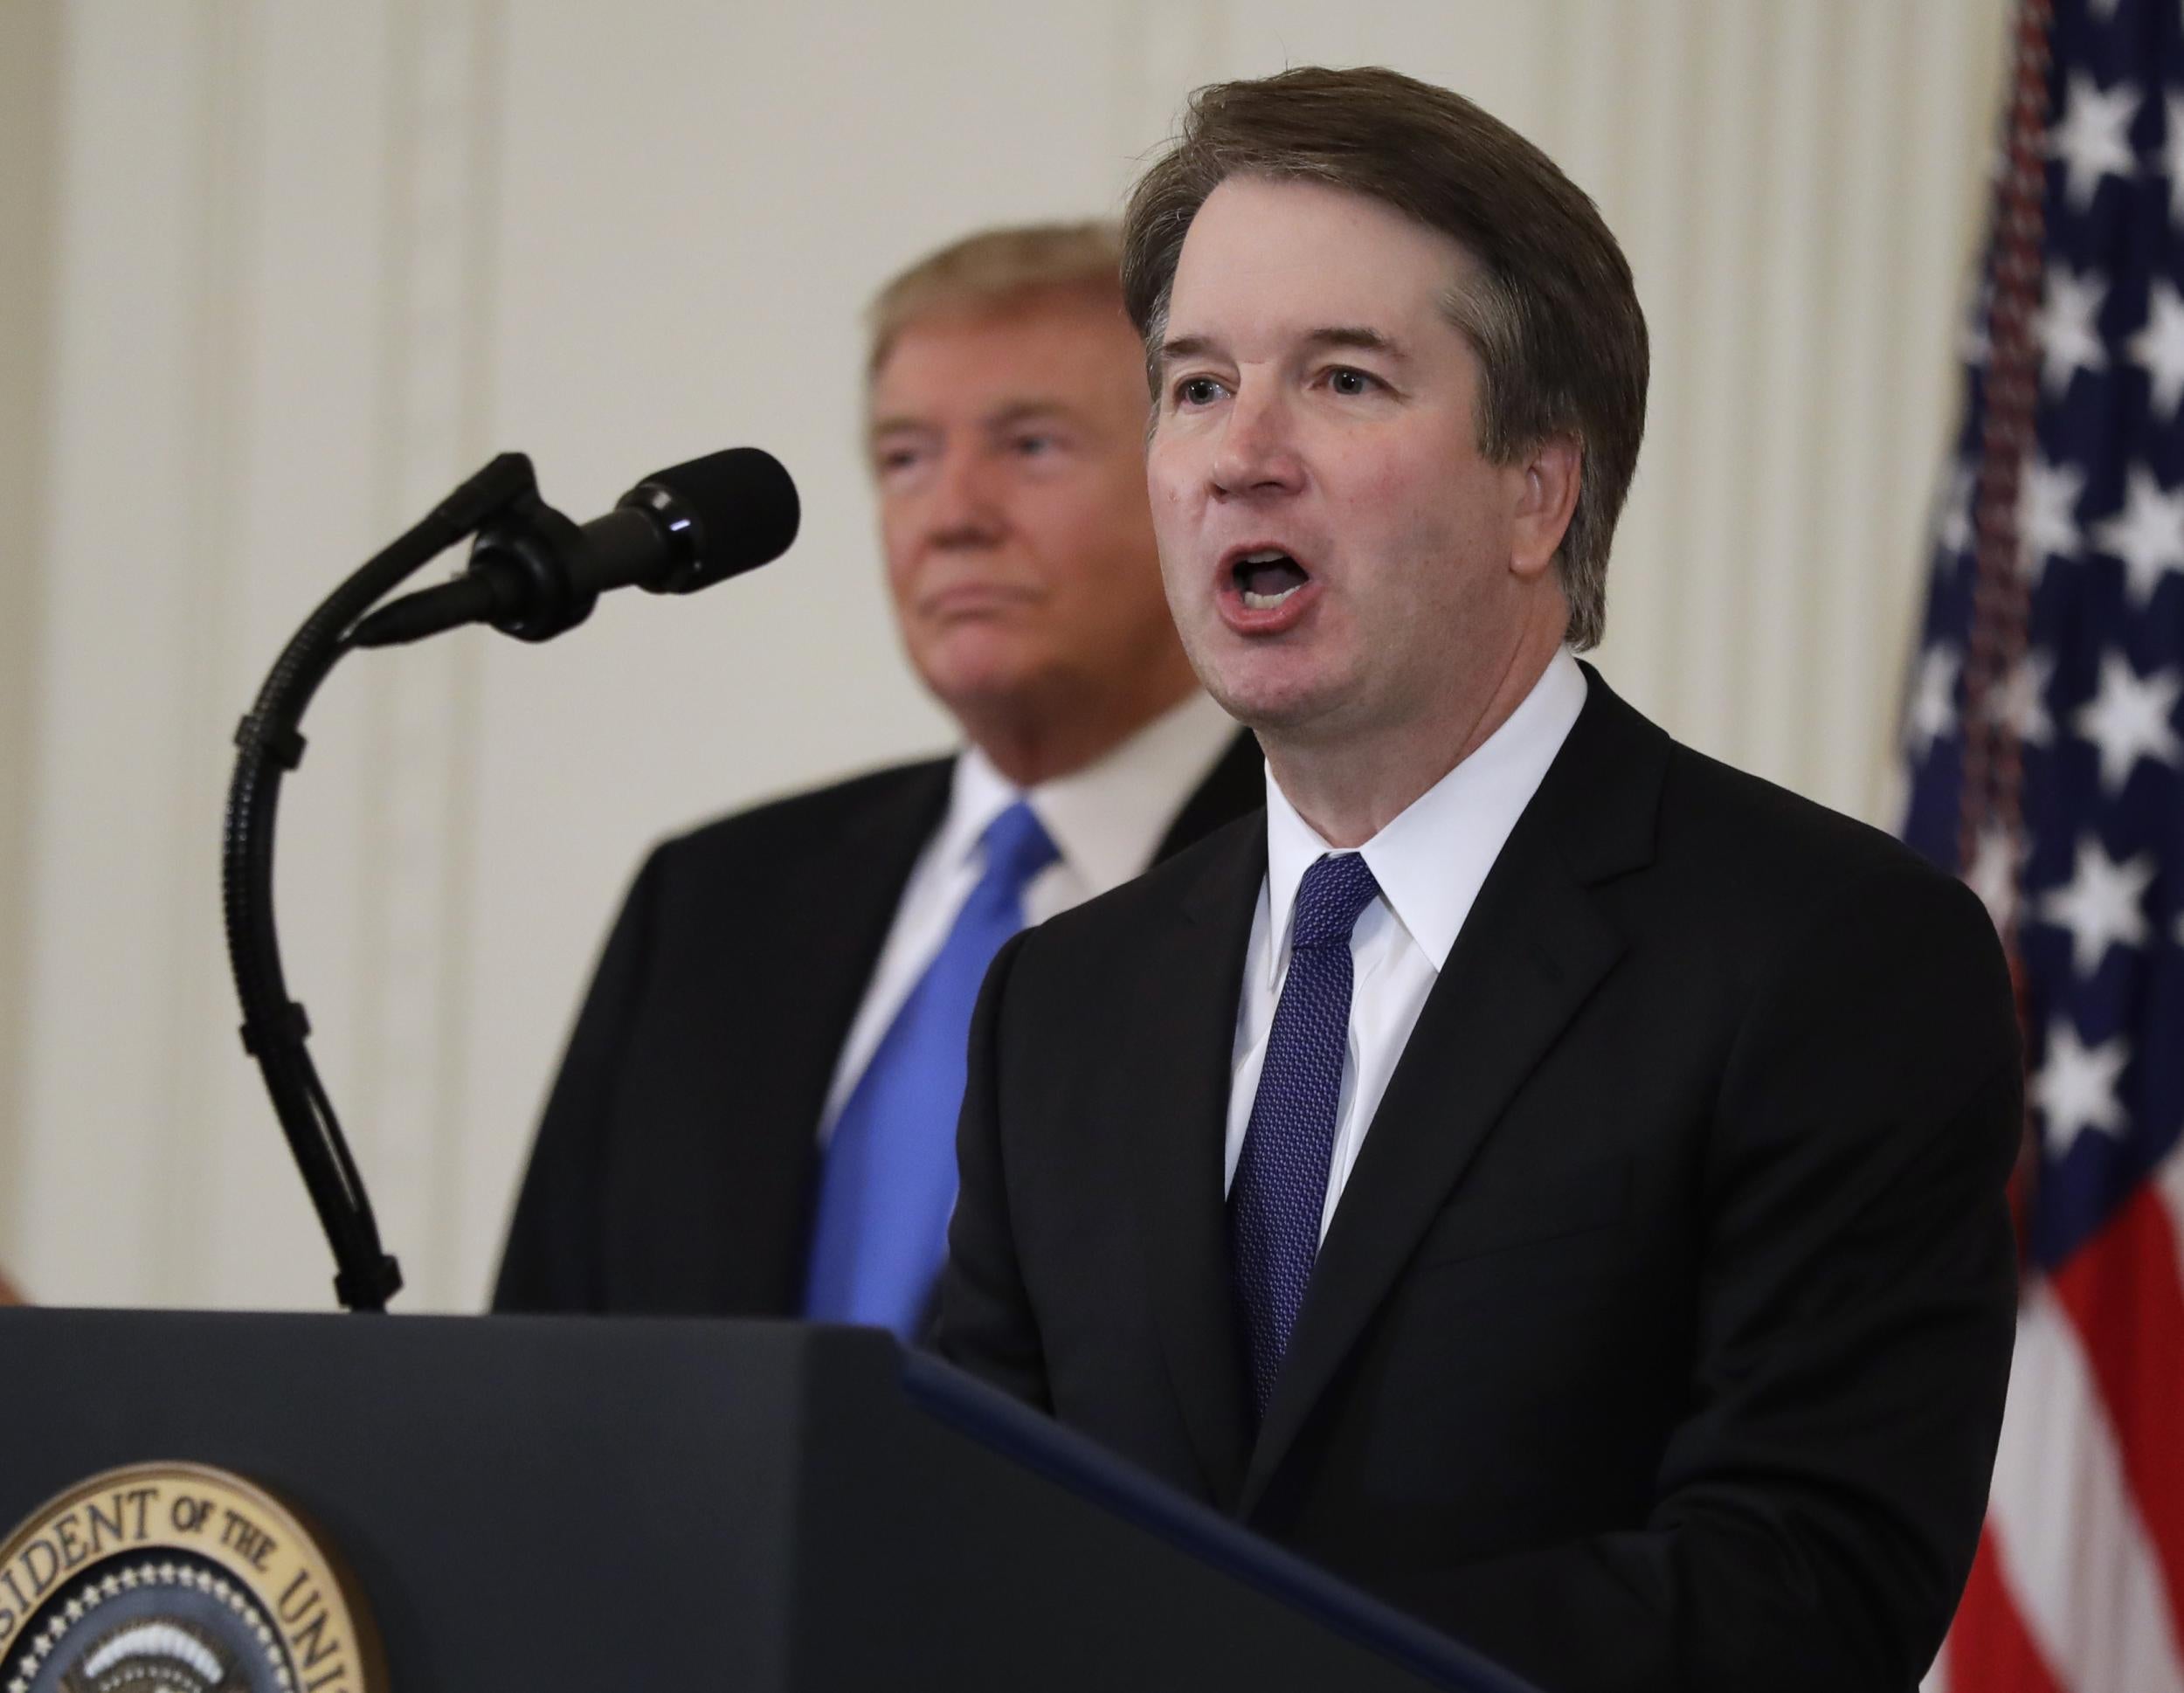 Republicans are attempting to push a vote on Supreme Court nominee Brett Kavanaugh before Democrats can review his bevy of writings from his tenure as George W Bush's staff secretary